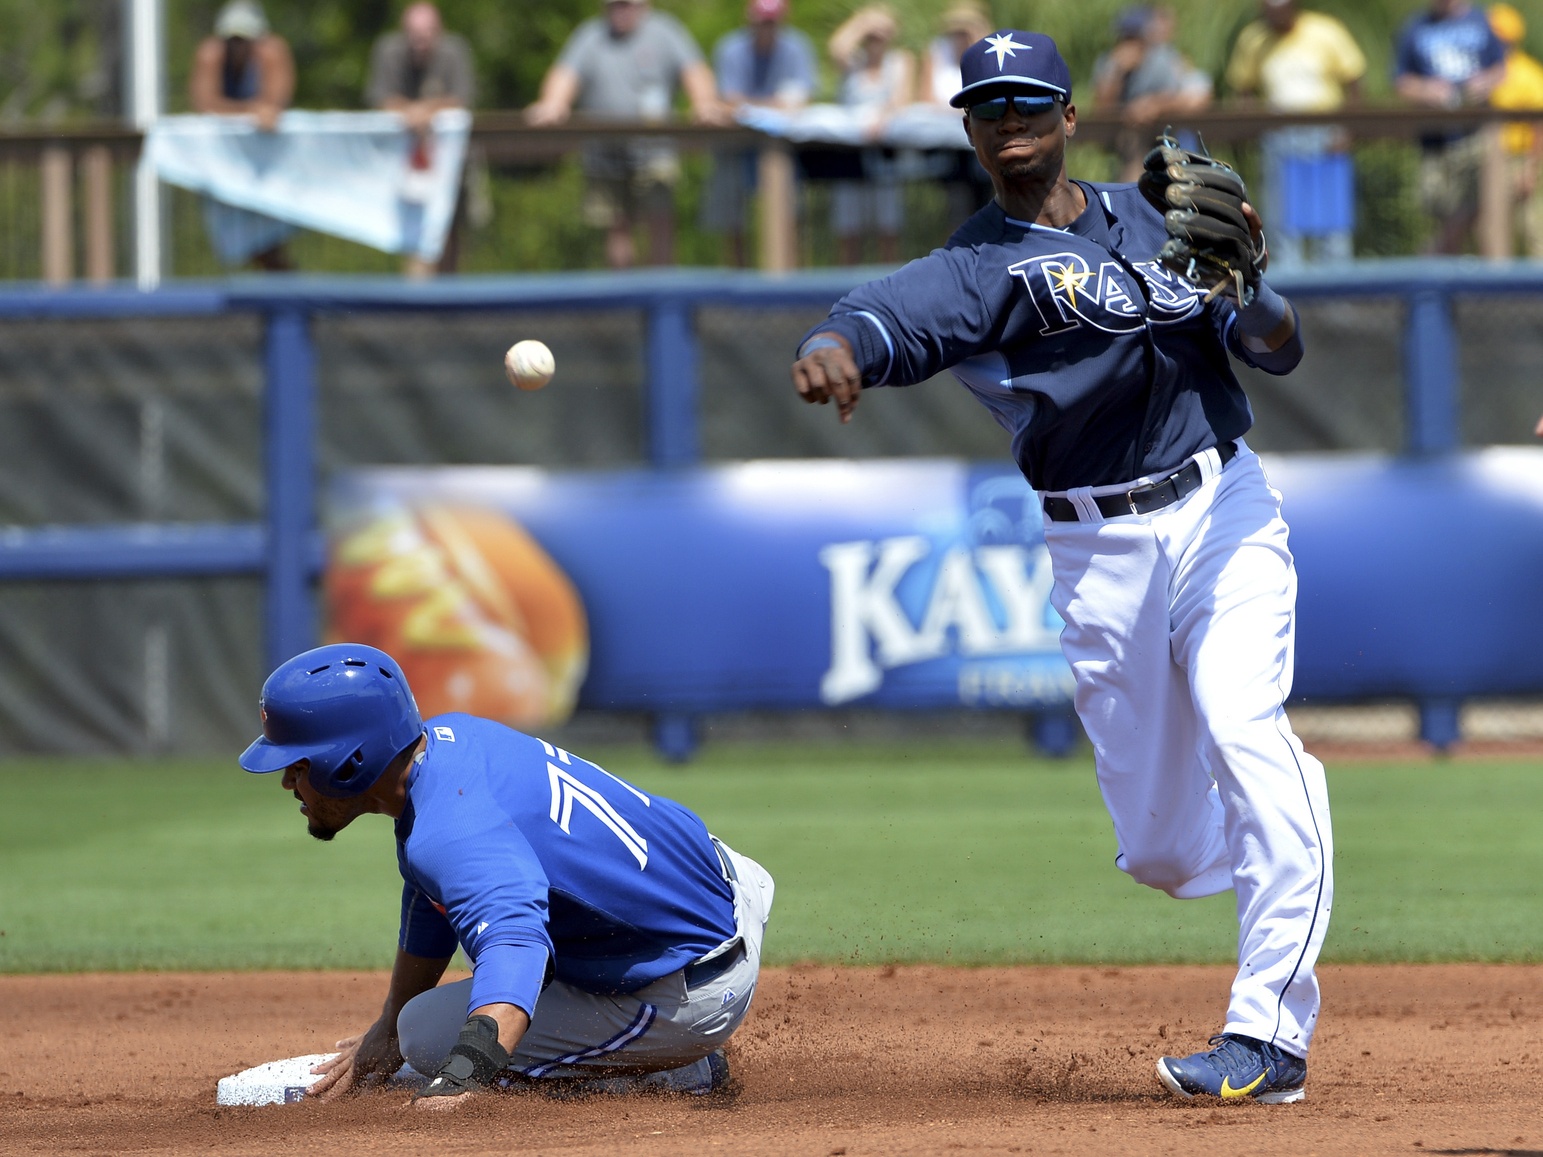 New Rays coach calls Tim Beckham a ‘winner’ who will do better in the majors than the minors